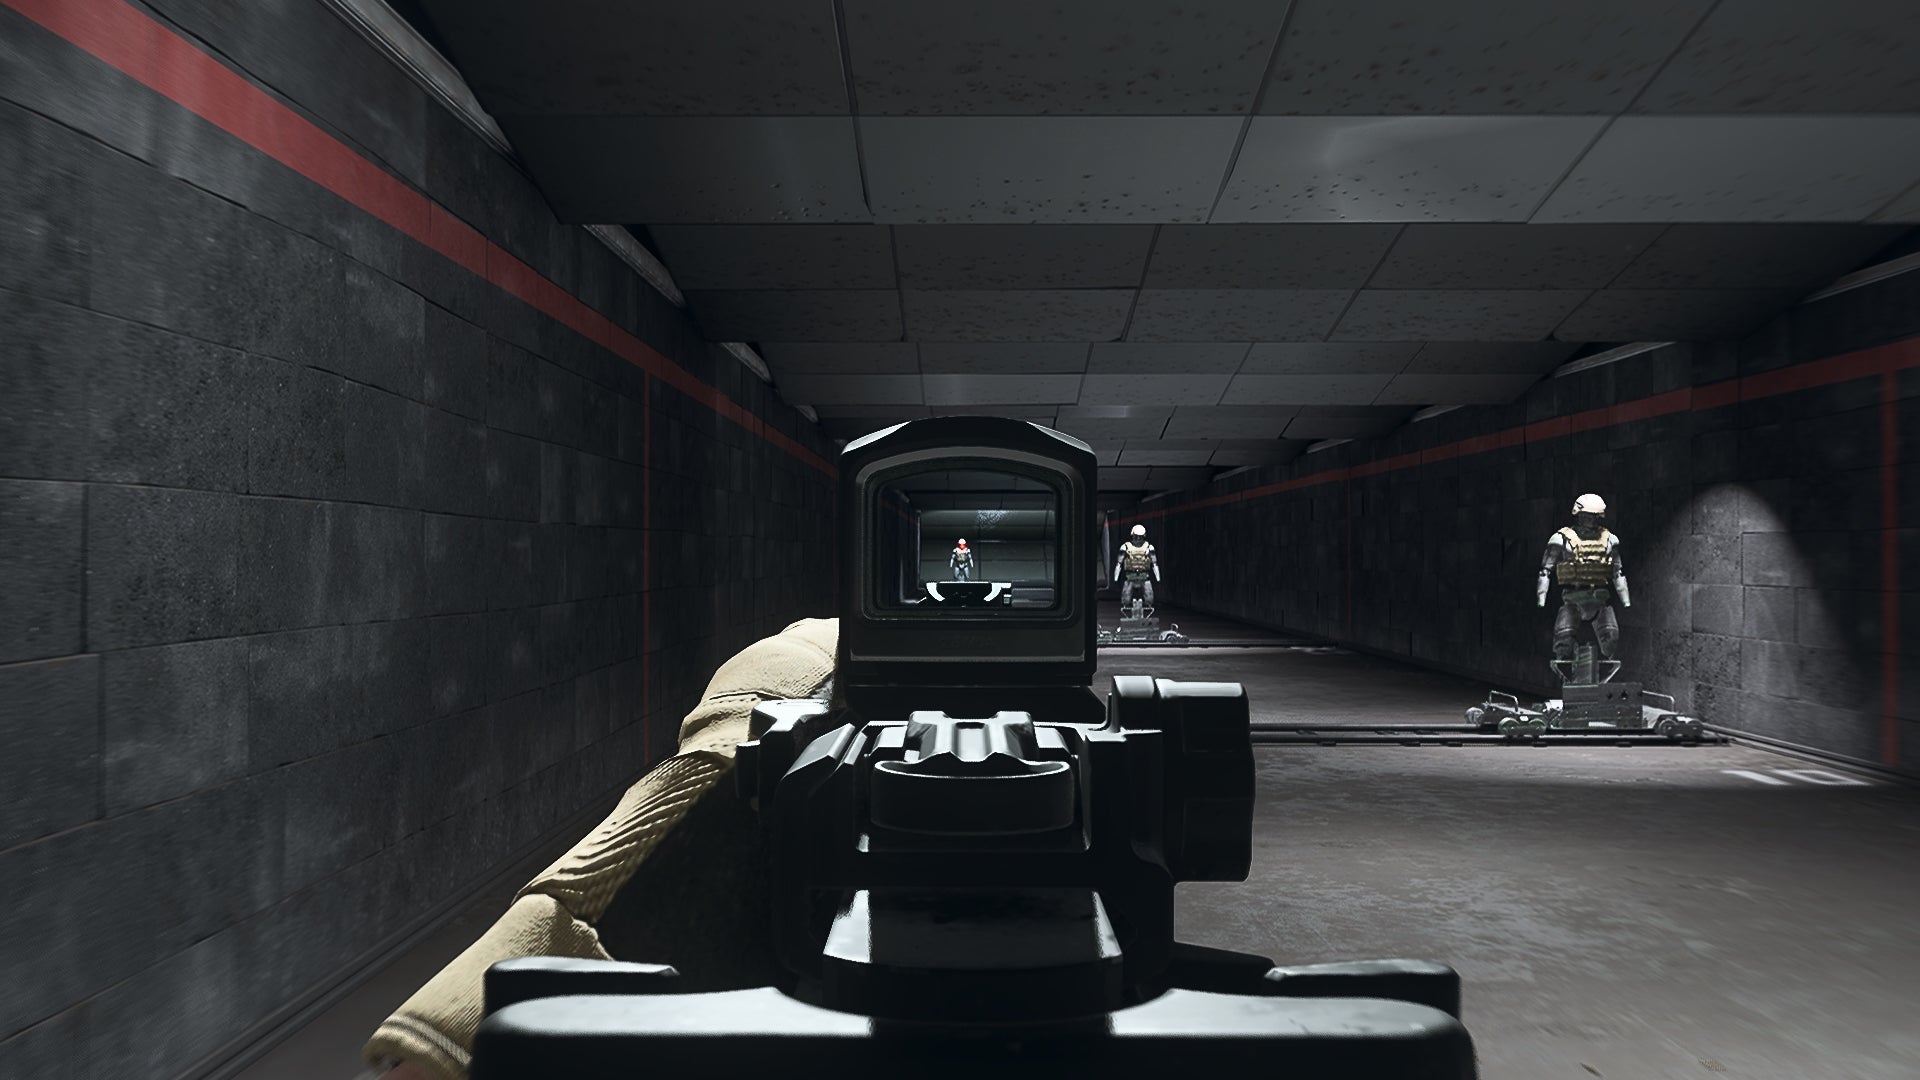 The player in Warzone 2.0 aims at a training dummy using the SZ Minitac 40 optic attachment.